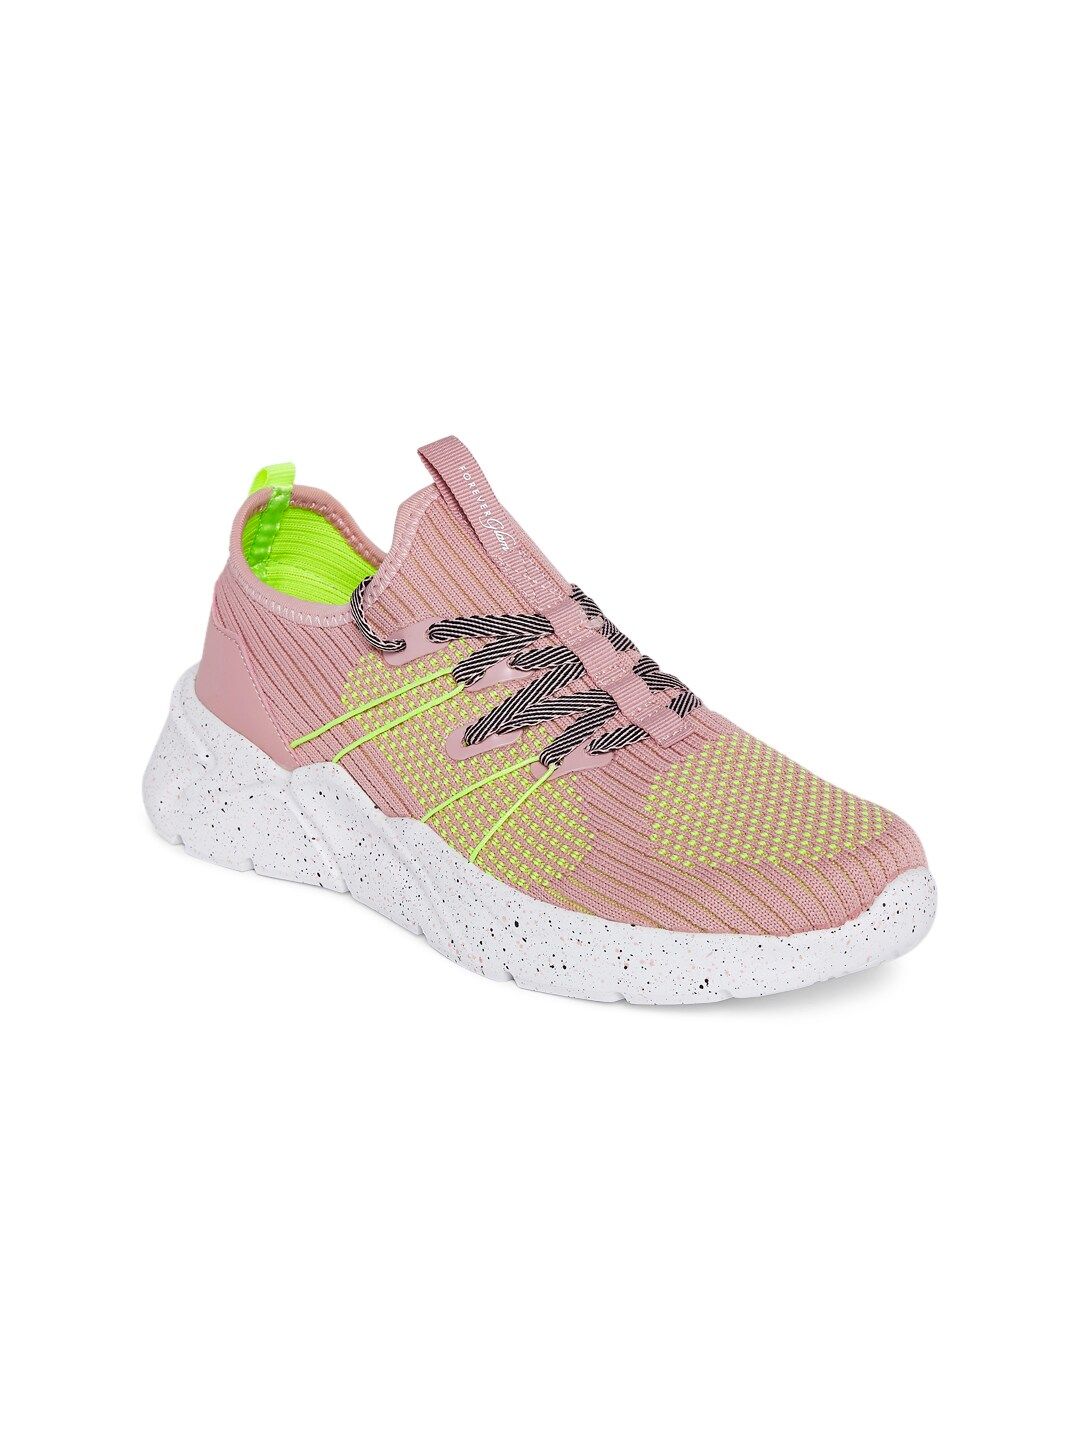 Forever Glam by Pantaloons Women Pink & Green Flyknit Walking Non-Marking Shoes Price in India